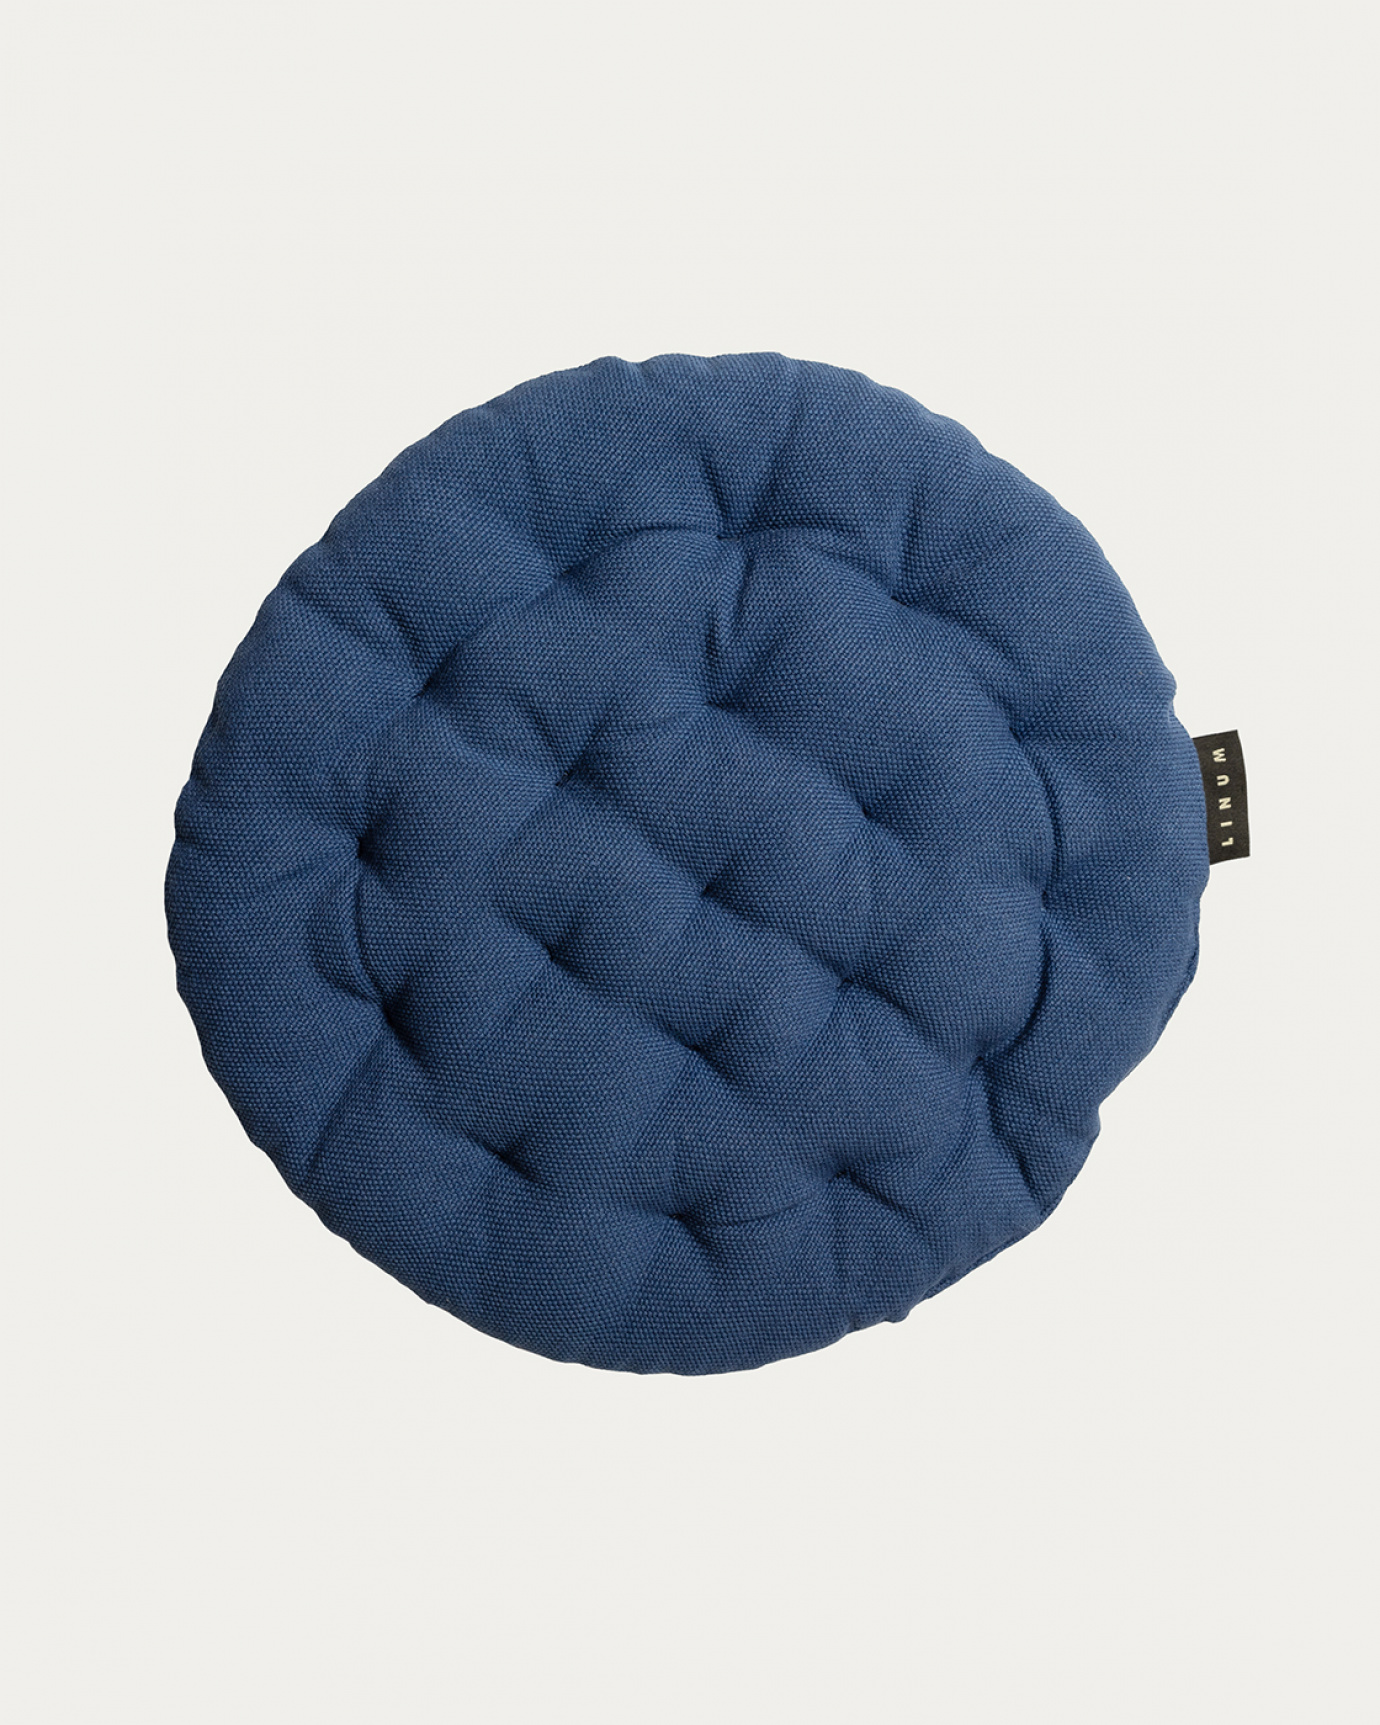 Product image indigo blue PEPPER seat cushion made of soft cotton with recycled polyester filling from LINUM DESIGN. Size ø37 cm.